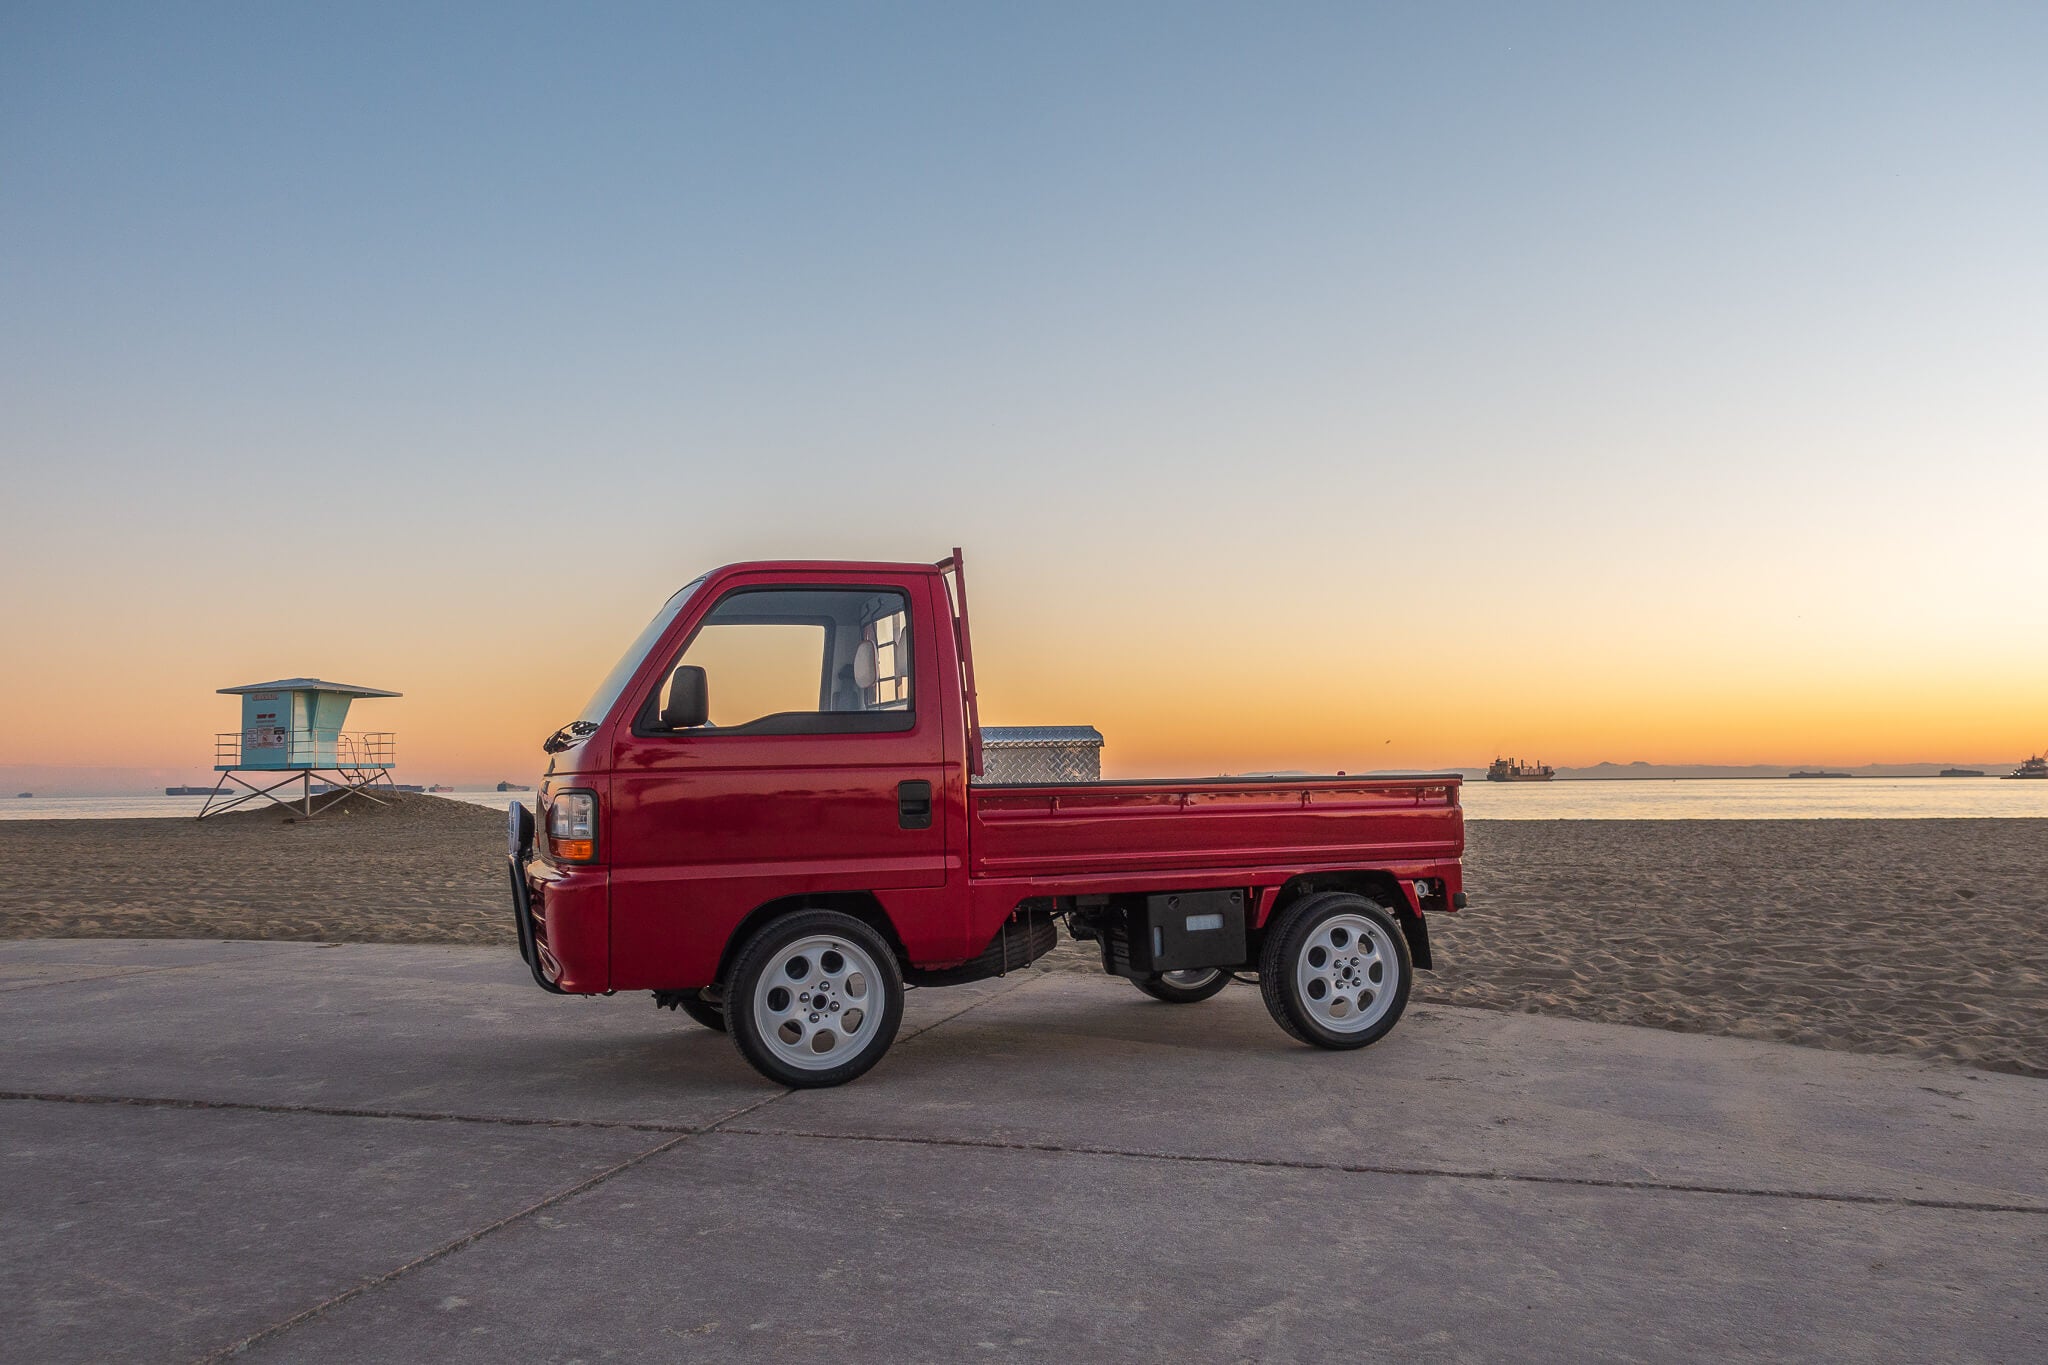 Red Honda Acty Kei Truck Parked on a Beach at Sunset with a Lifeguard Tower in the Background